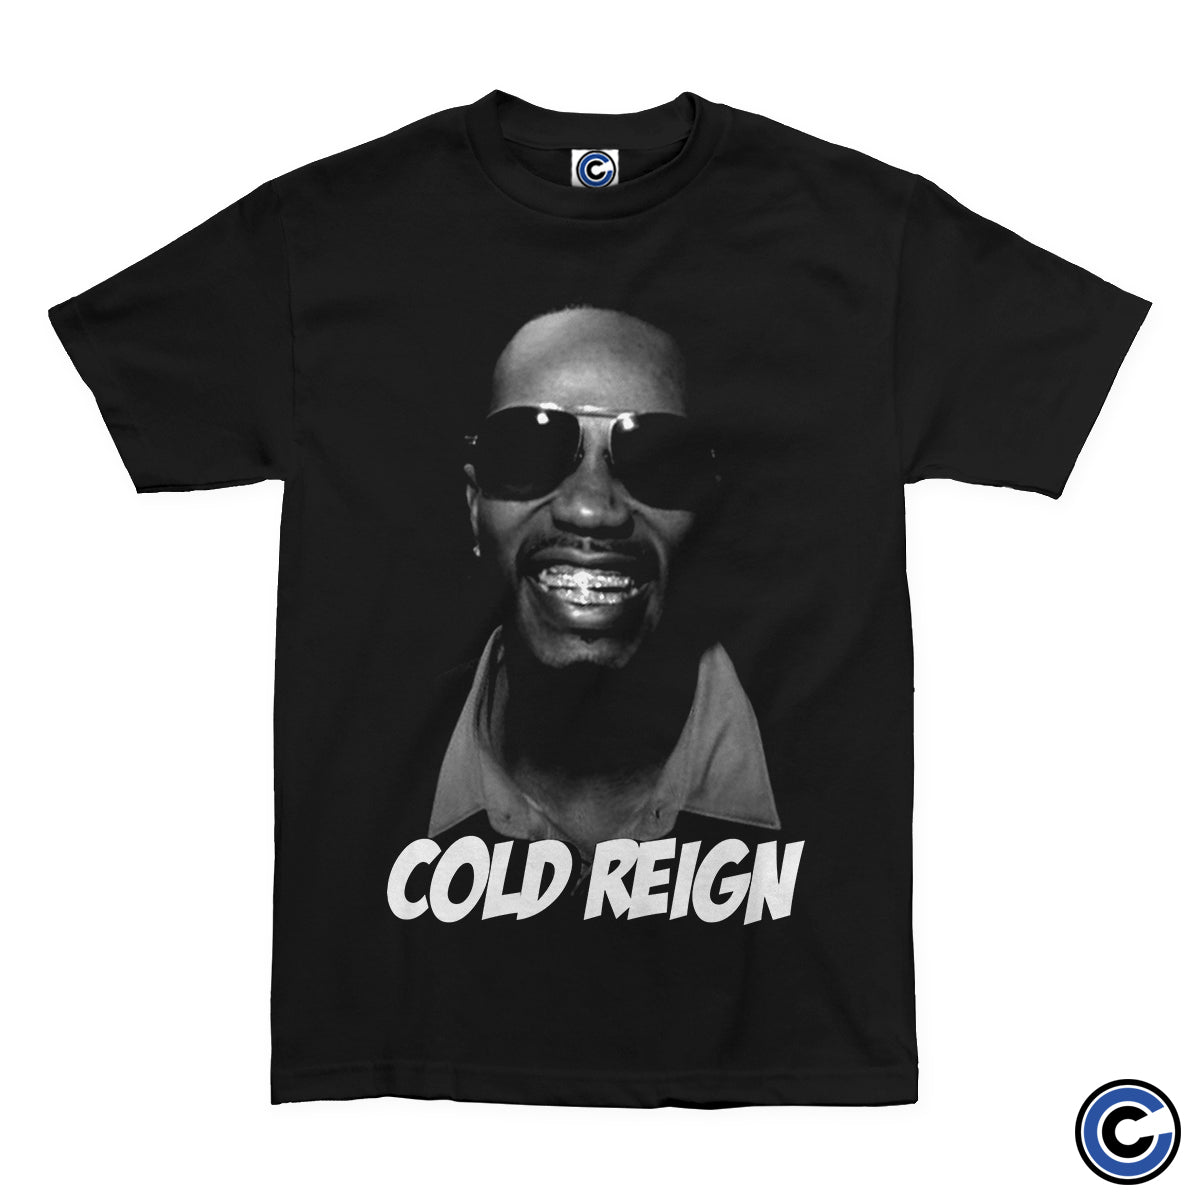 Cold Reign "Grill" Shirt